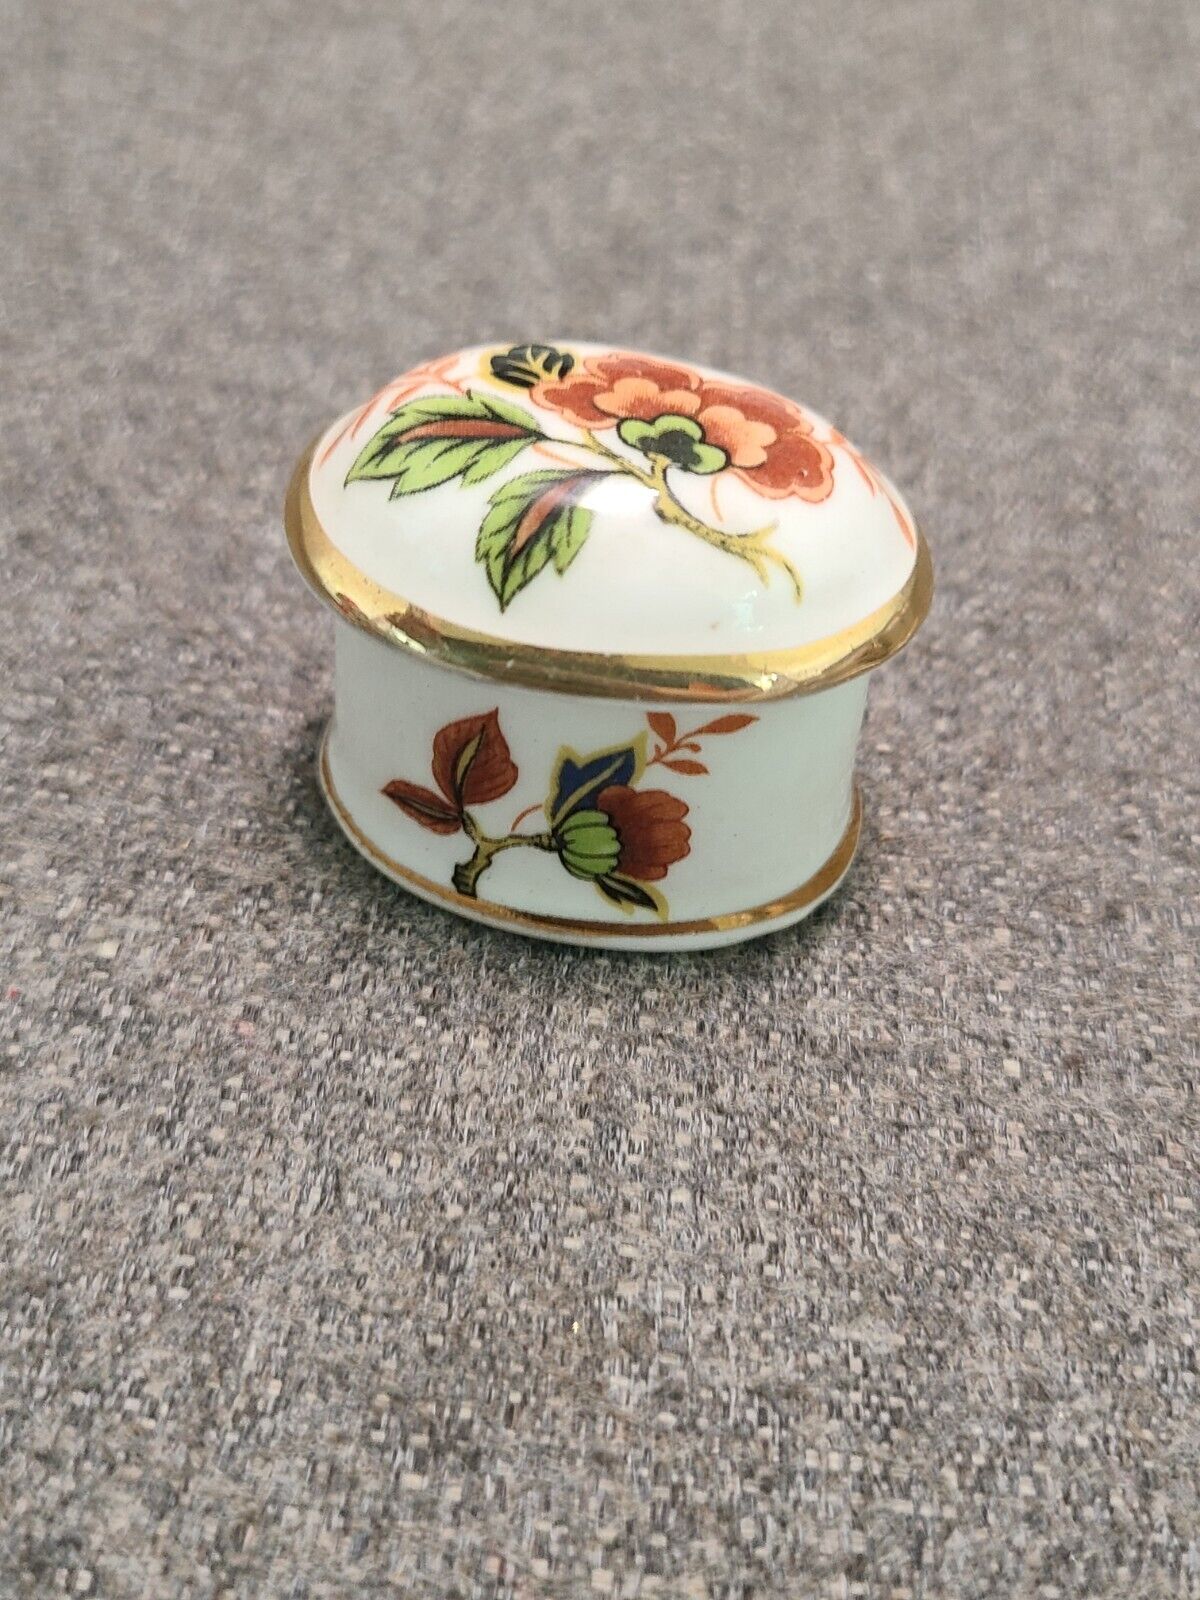 Porcelain Floral Oval Trinket Box NEWHALL Staffordshire England